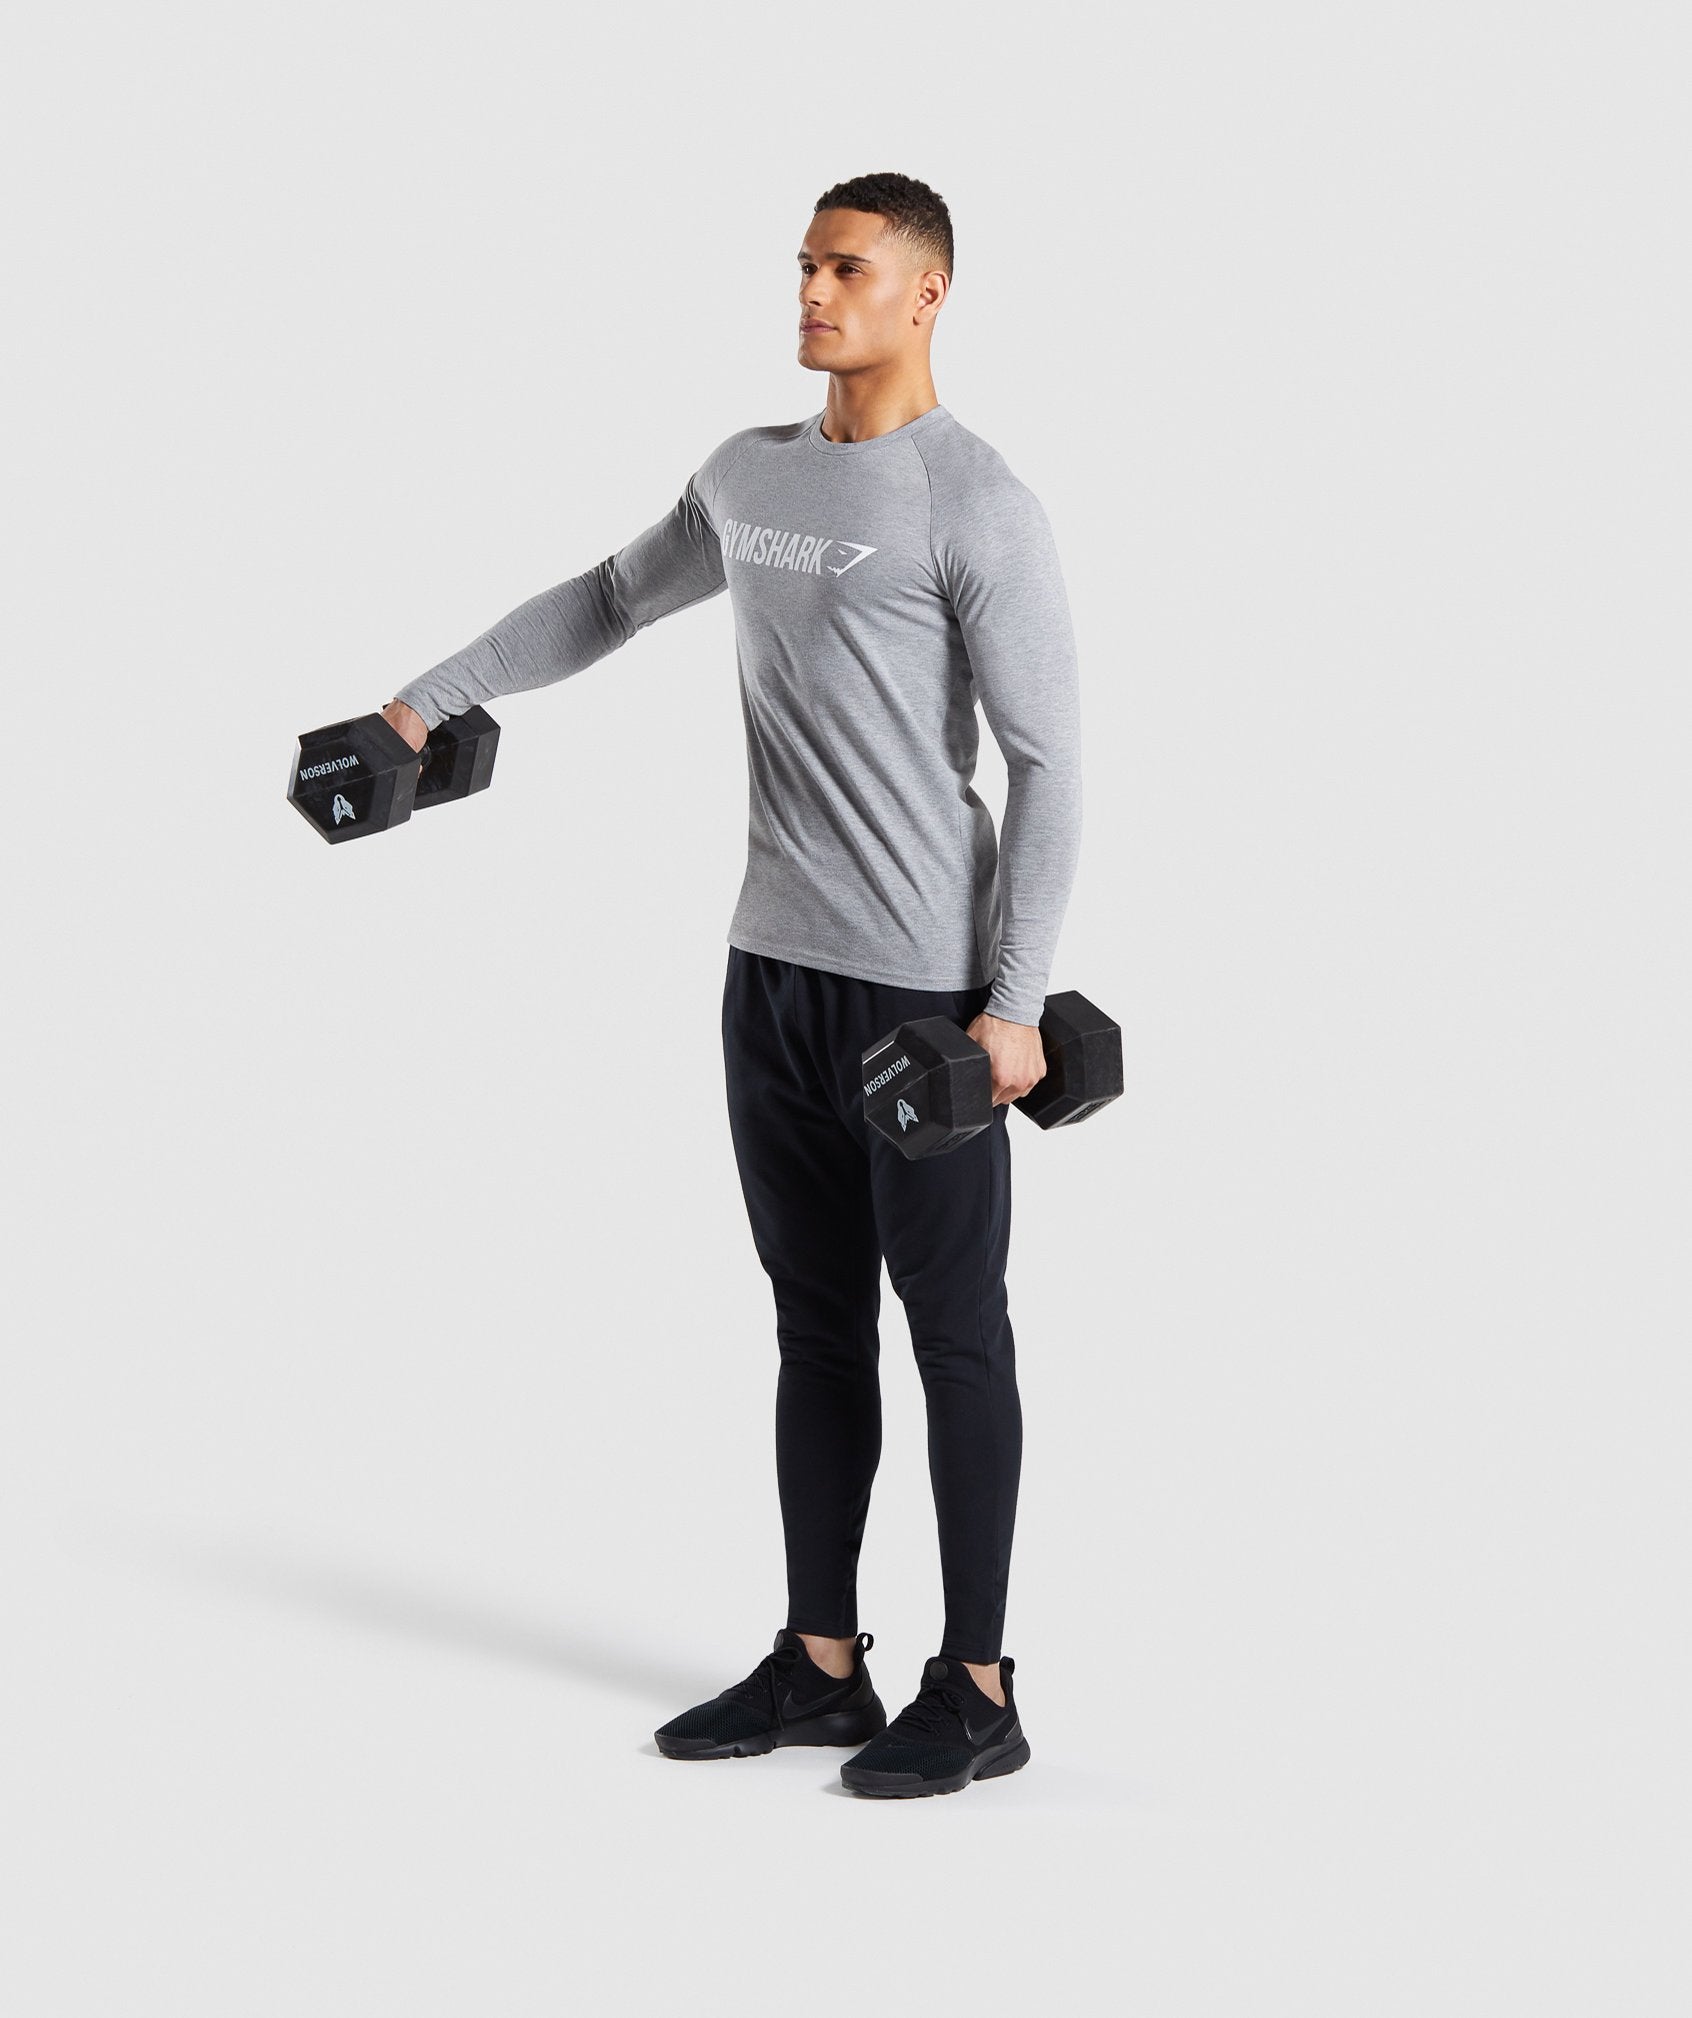 Apollo Long Sleeve T-Shirt in Grey - view 4